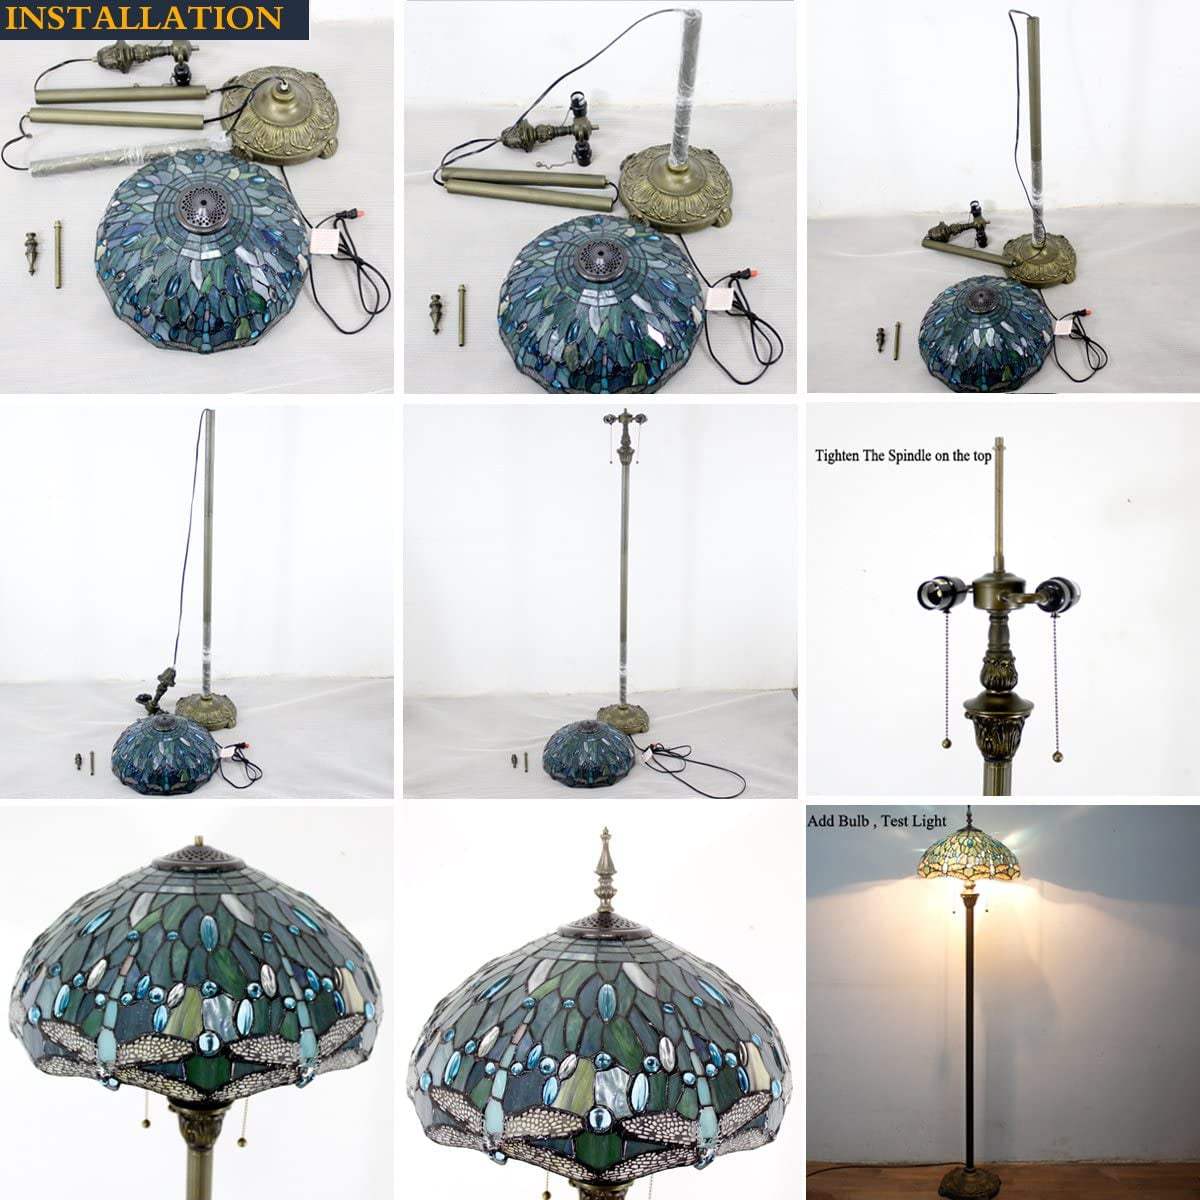 BBNBDMZ  Floor Lamp Sea Blue Stained Glass Dragonfly Standing Reading Light 16X16X64 Inches Antique Pole Corner Lamp Decor Bedroom Living Room  Office S147 Series